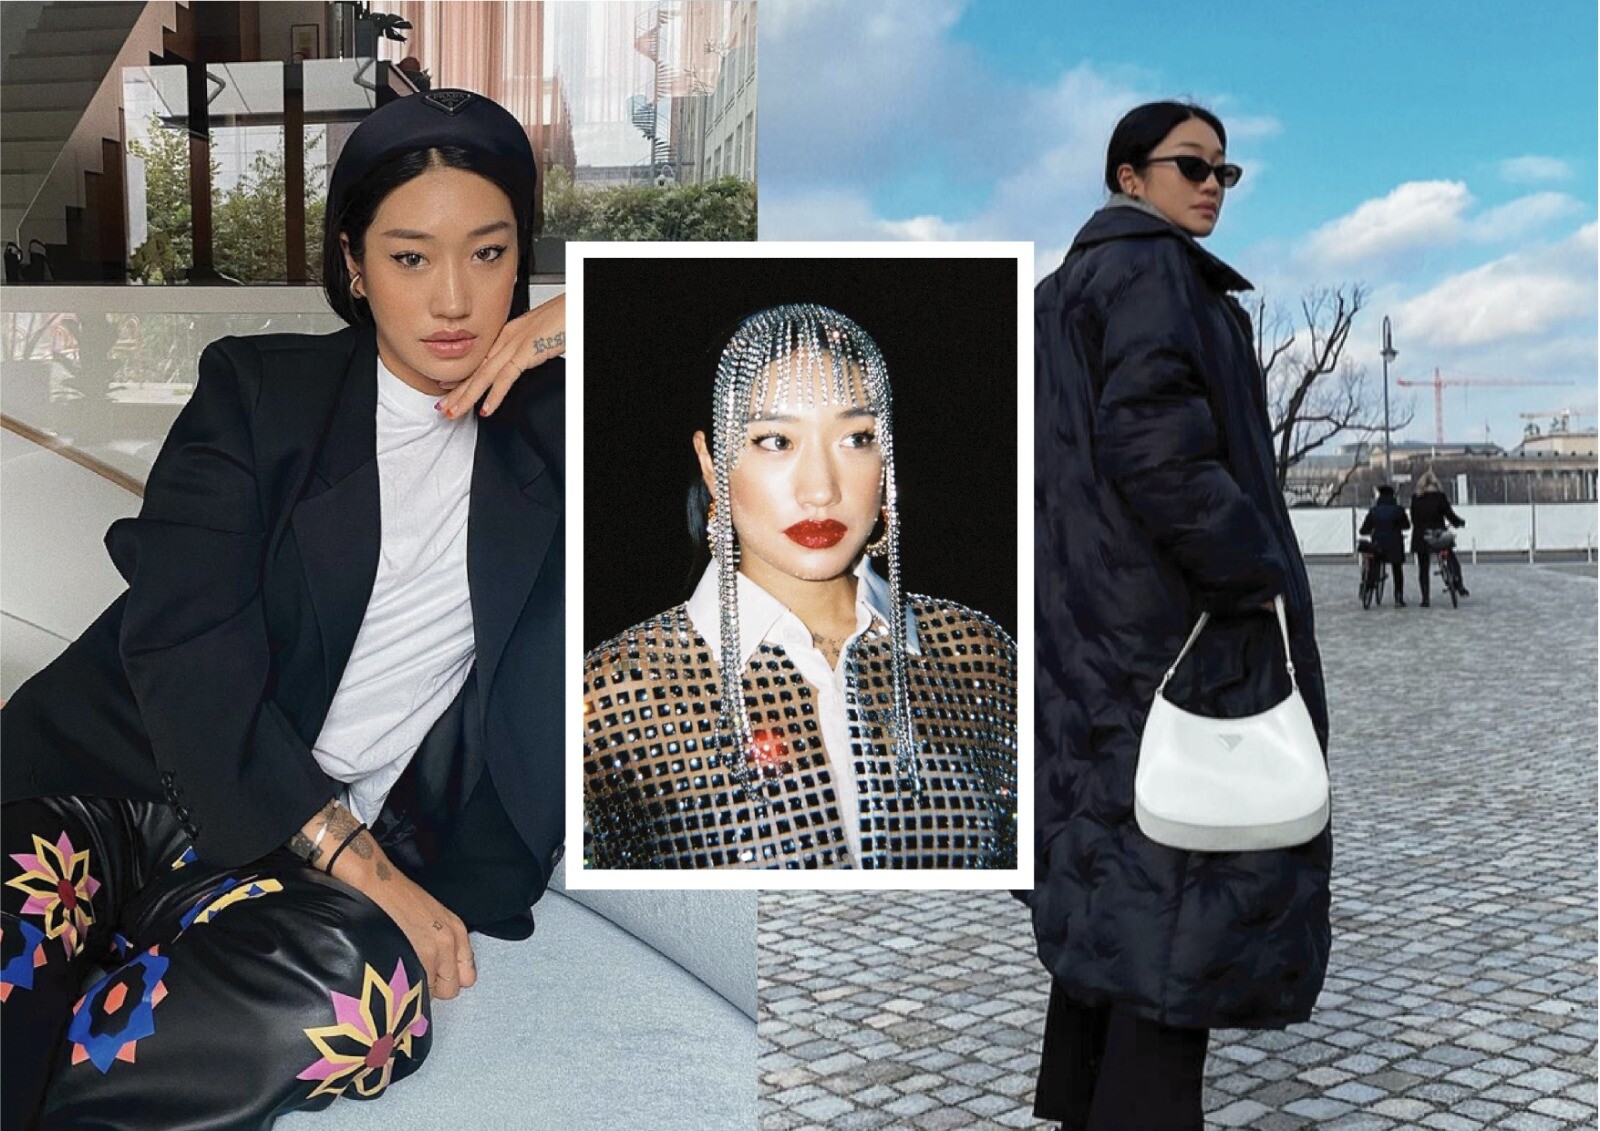 Here are 7 #ootd for your #FridayFeeling. Peggy Gou is definitely